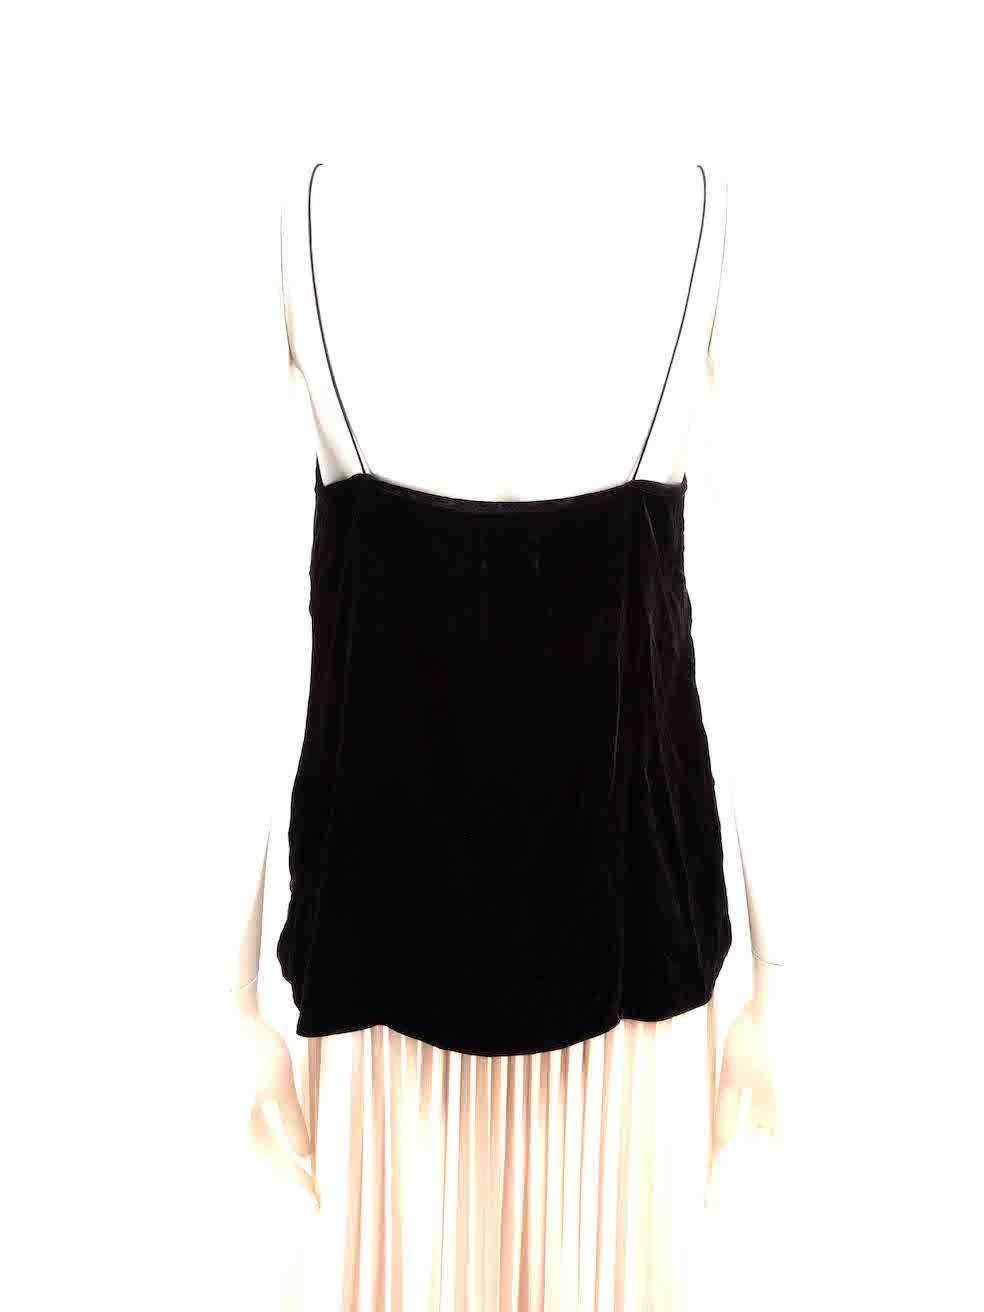 Cami NYC Black Velvet Spaghetti Strap Camisole Size S In Good Condition For Sale In London, GB